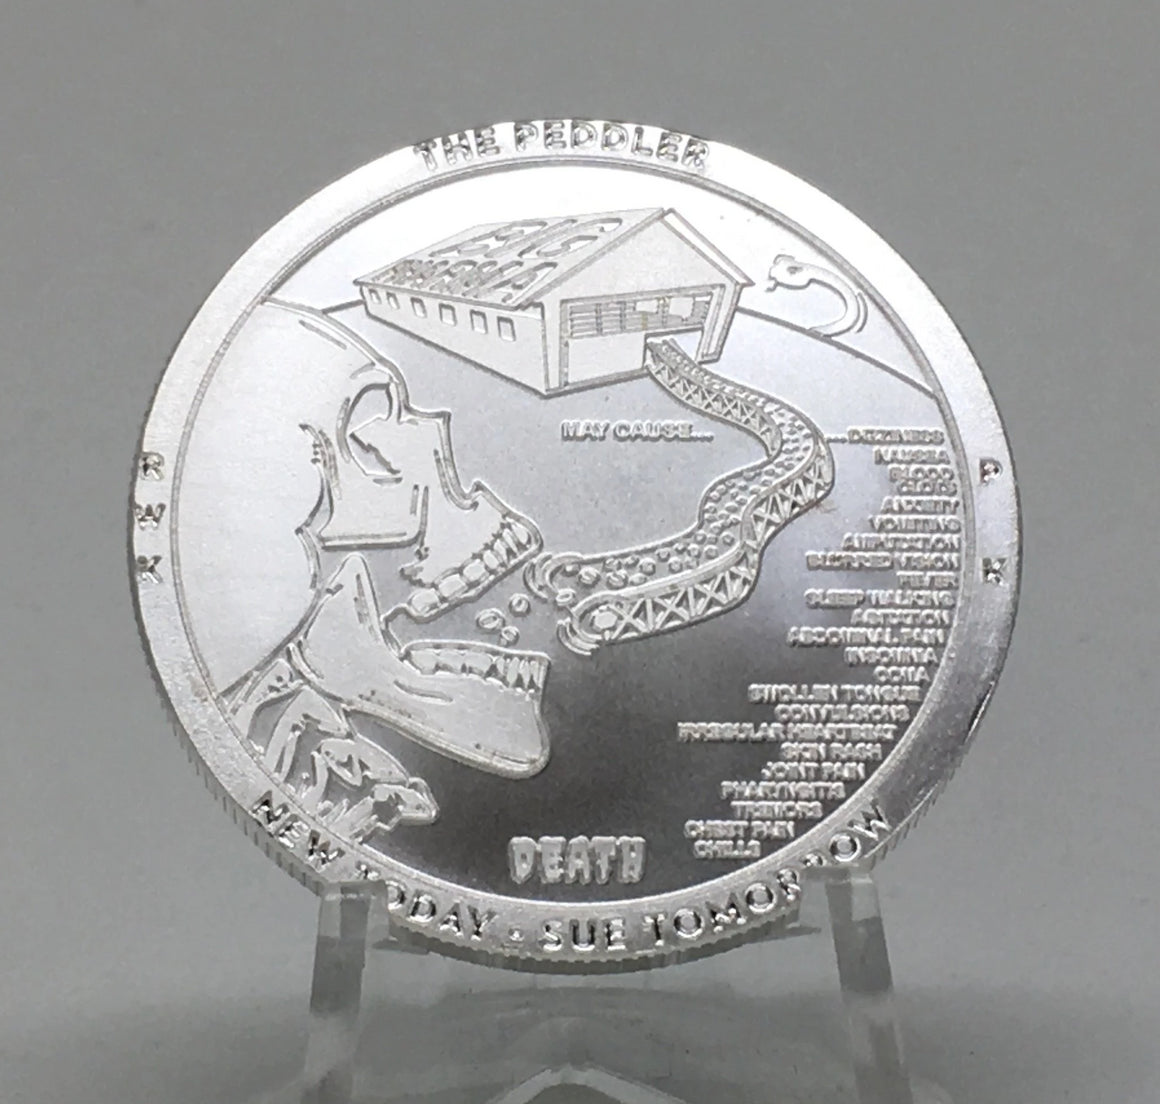 Toxic Series Too #5 The Peddler, BU Finish by Chautauqua Silver Works, 1oz .999 Silver Round.